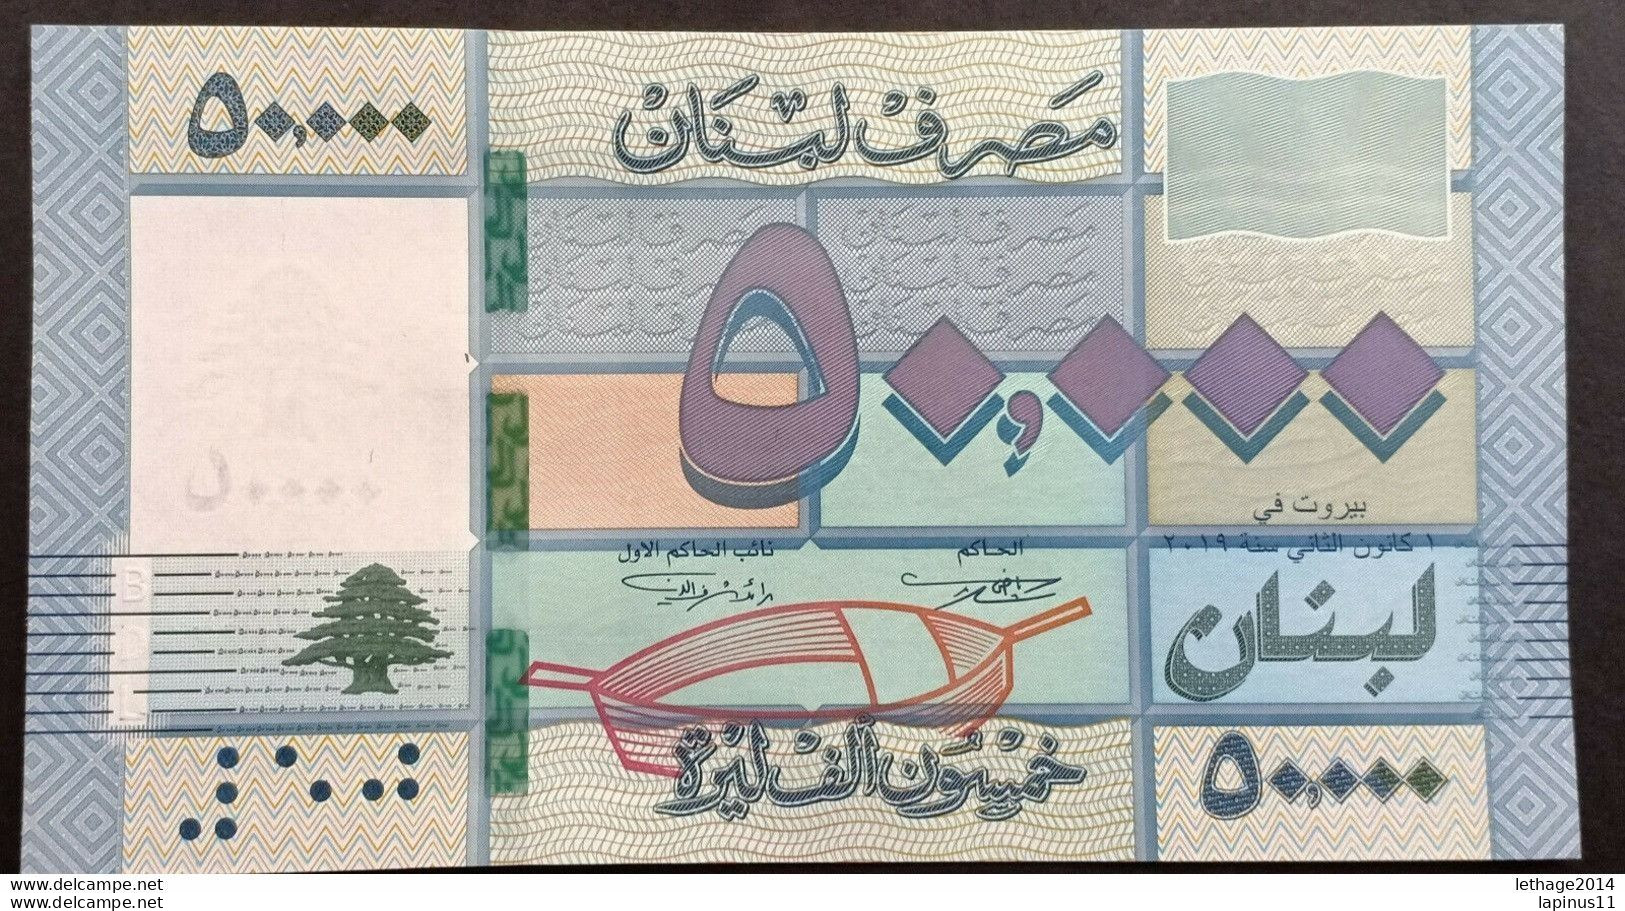 Just Issued, Lebanon 50000 Livres 2019 UNC New EARLY RELEASE Banknote Prefix D0 - Jordanie